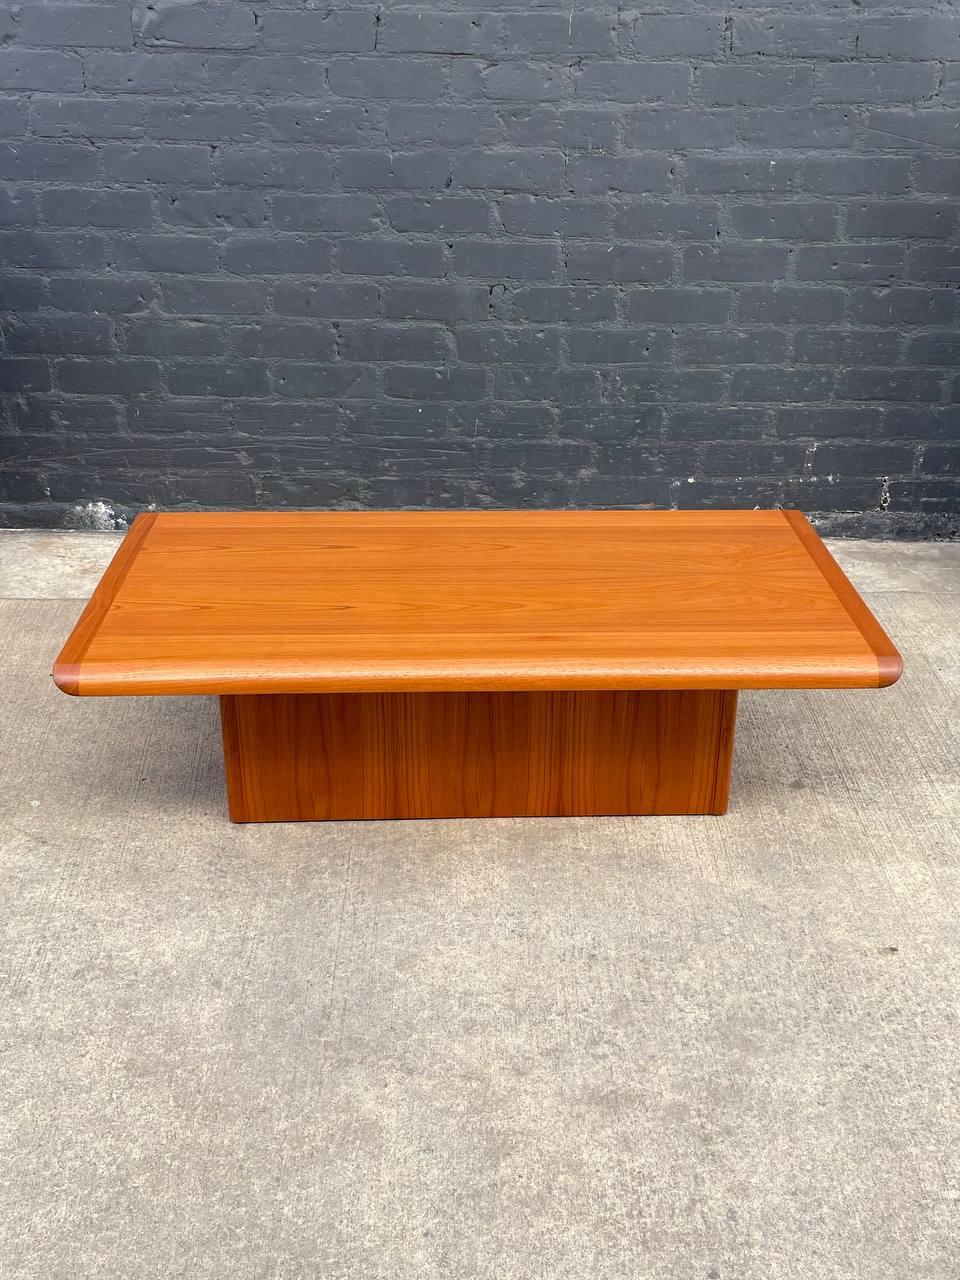 Newly Refinished - Mid-Century Danish Modern Teak Coffee Table by Vejle Stole In Excellent Condition For Sale In Los Angeles, CA